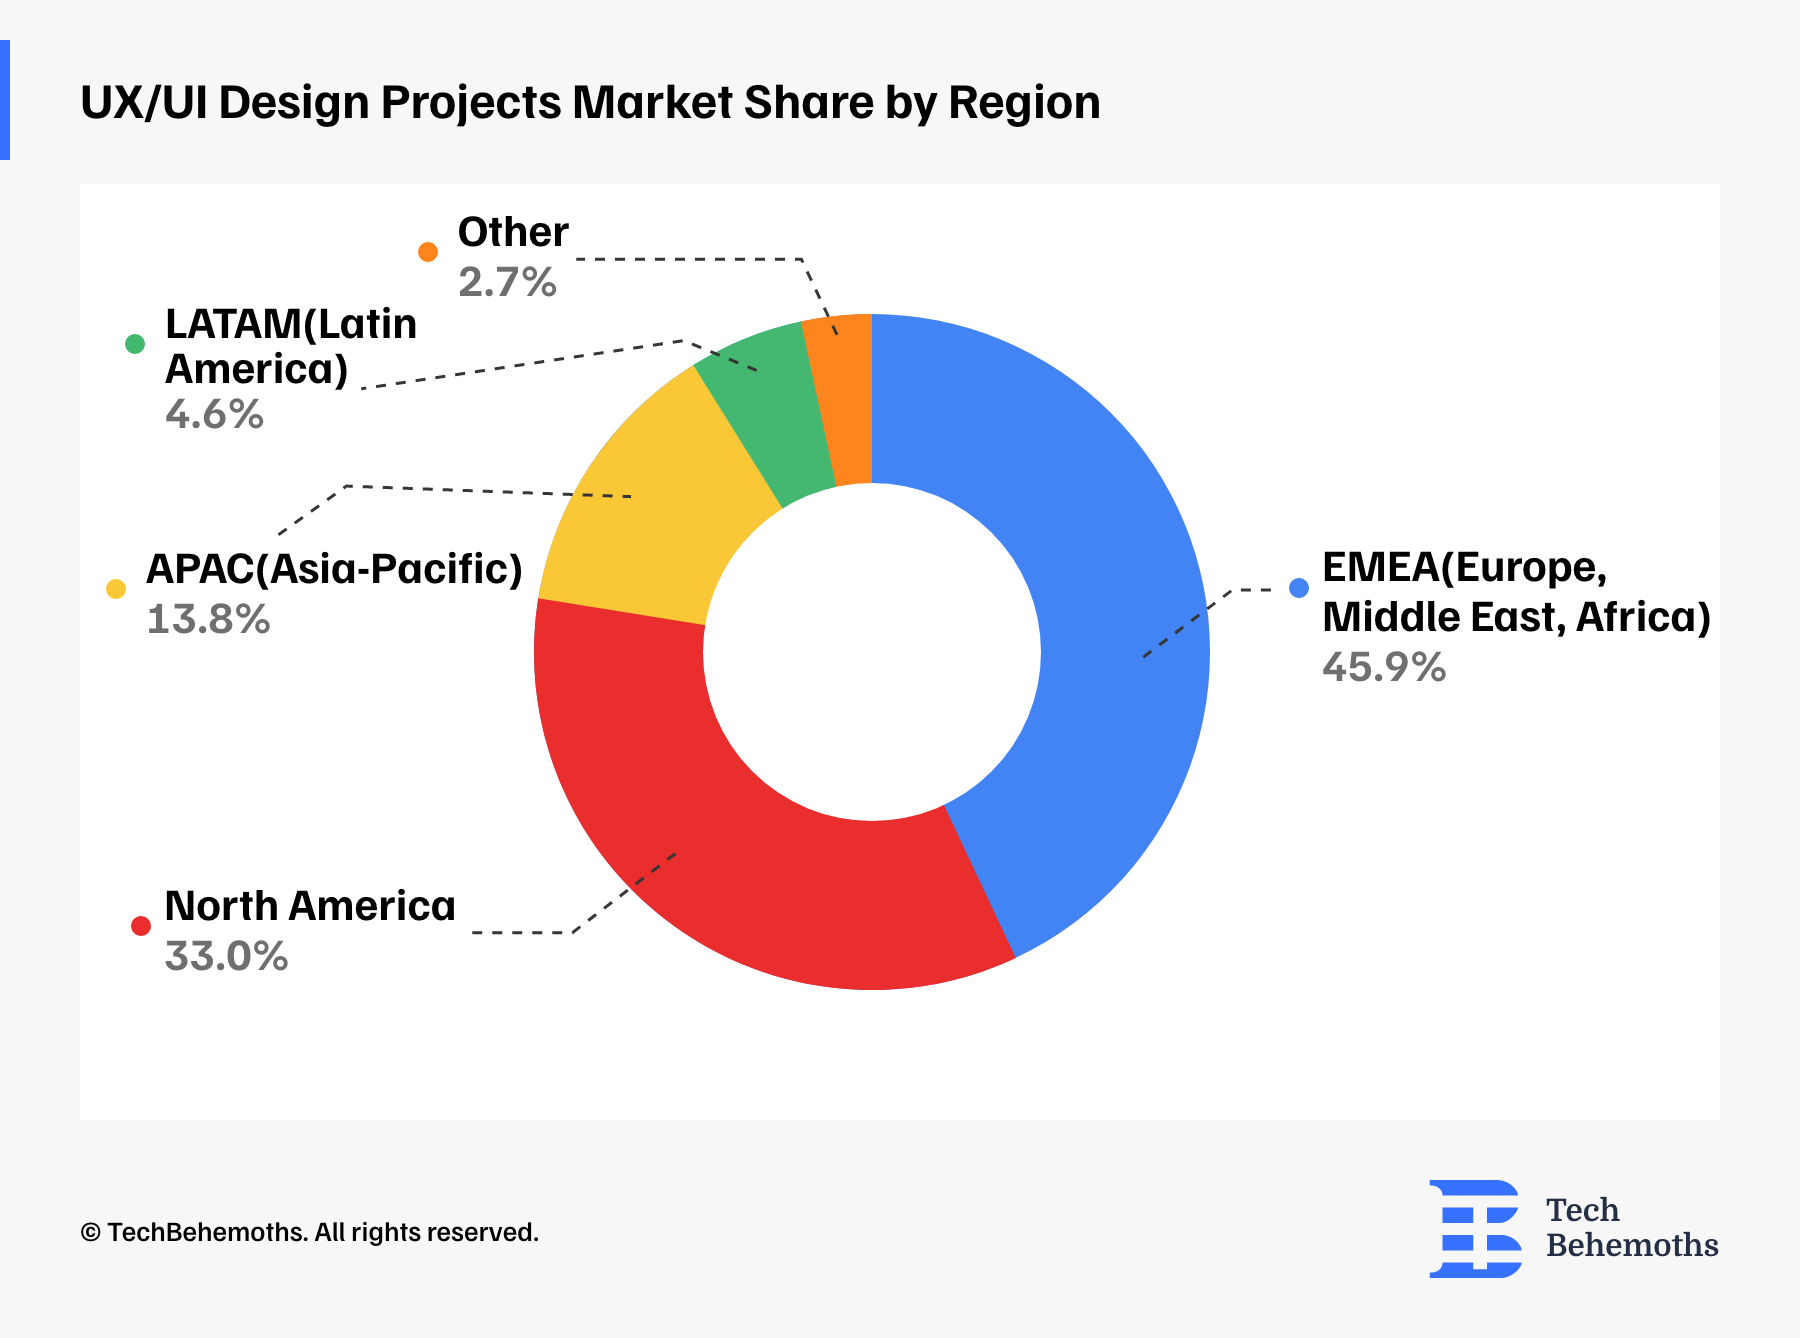 UX/UI Design Projects Market Share by Region